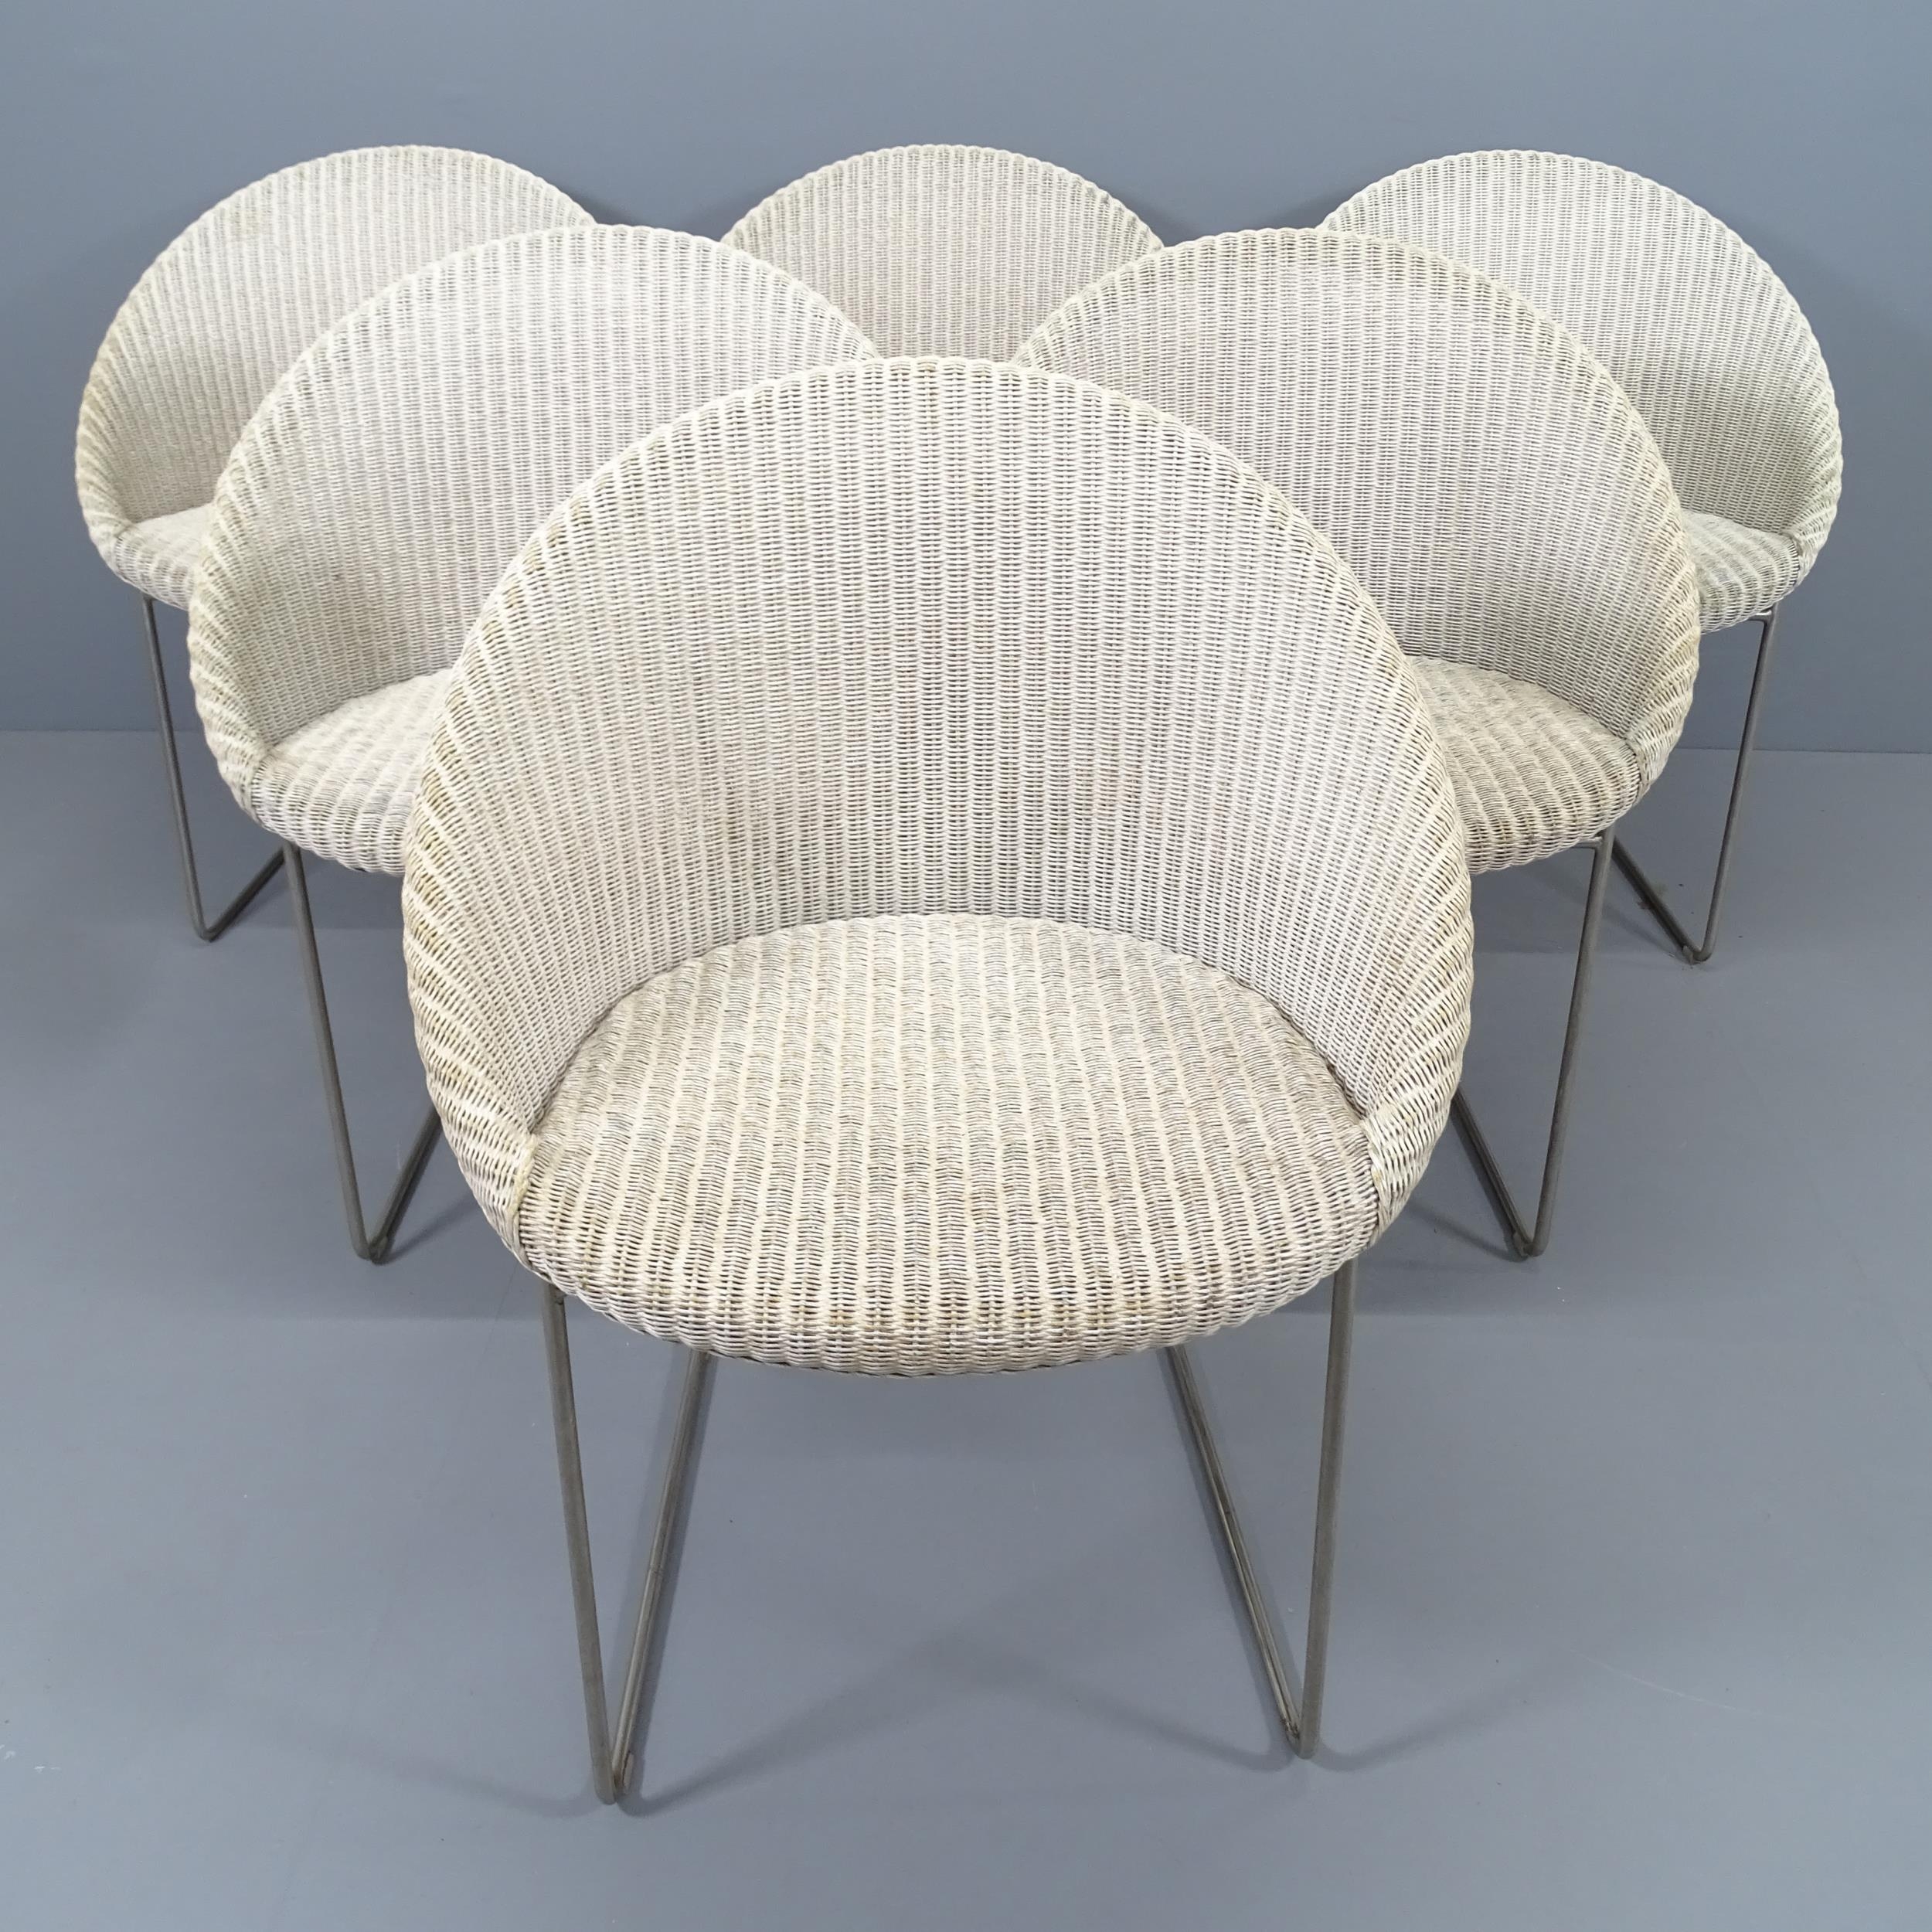 A set of six Vincent Shepperd Gipsy wicker dining chairs on stainless steel sled base. RRP £495